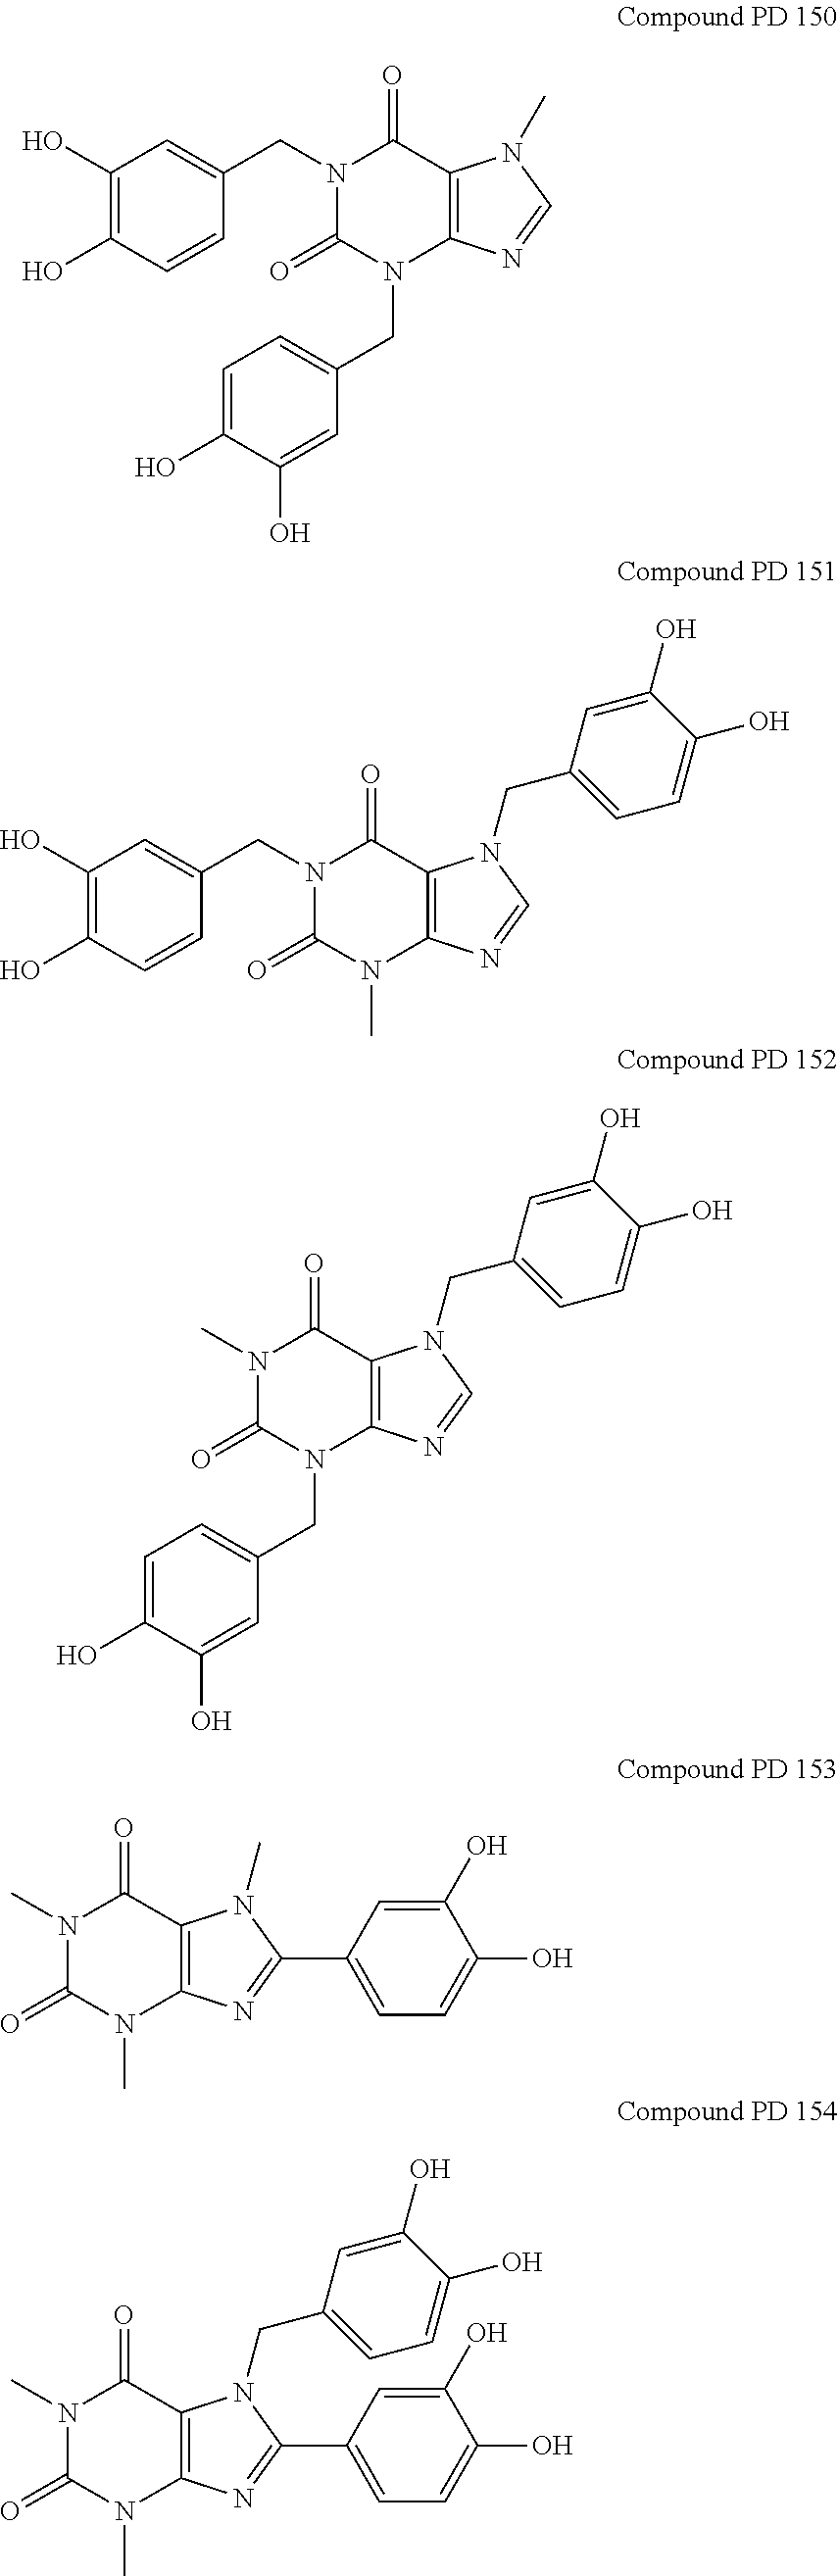 Caffeinated compounds and compositions for treatment of amyloid diseases and synucleinopathies